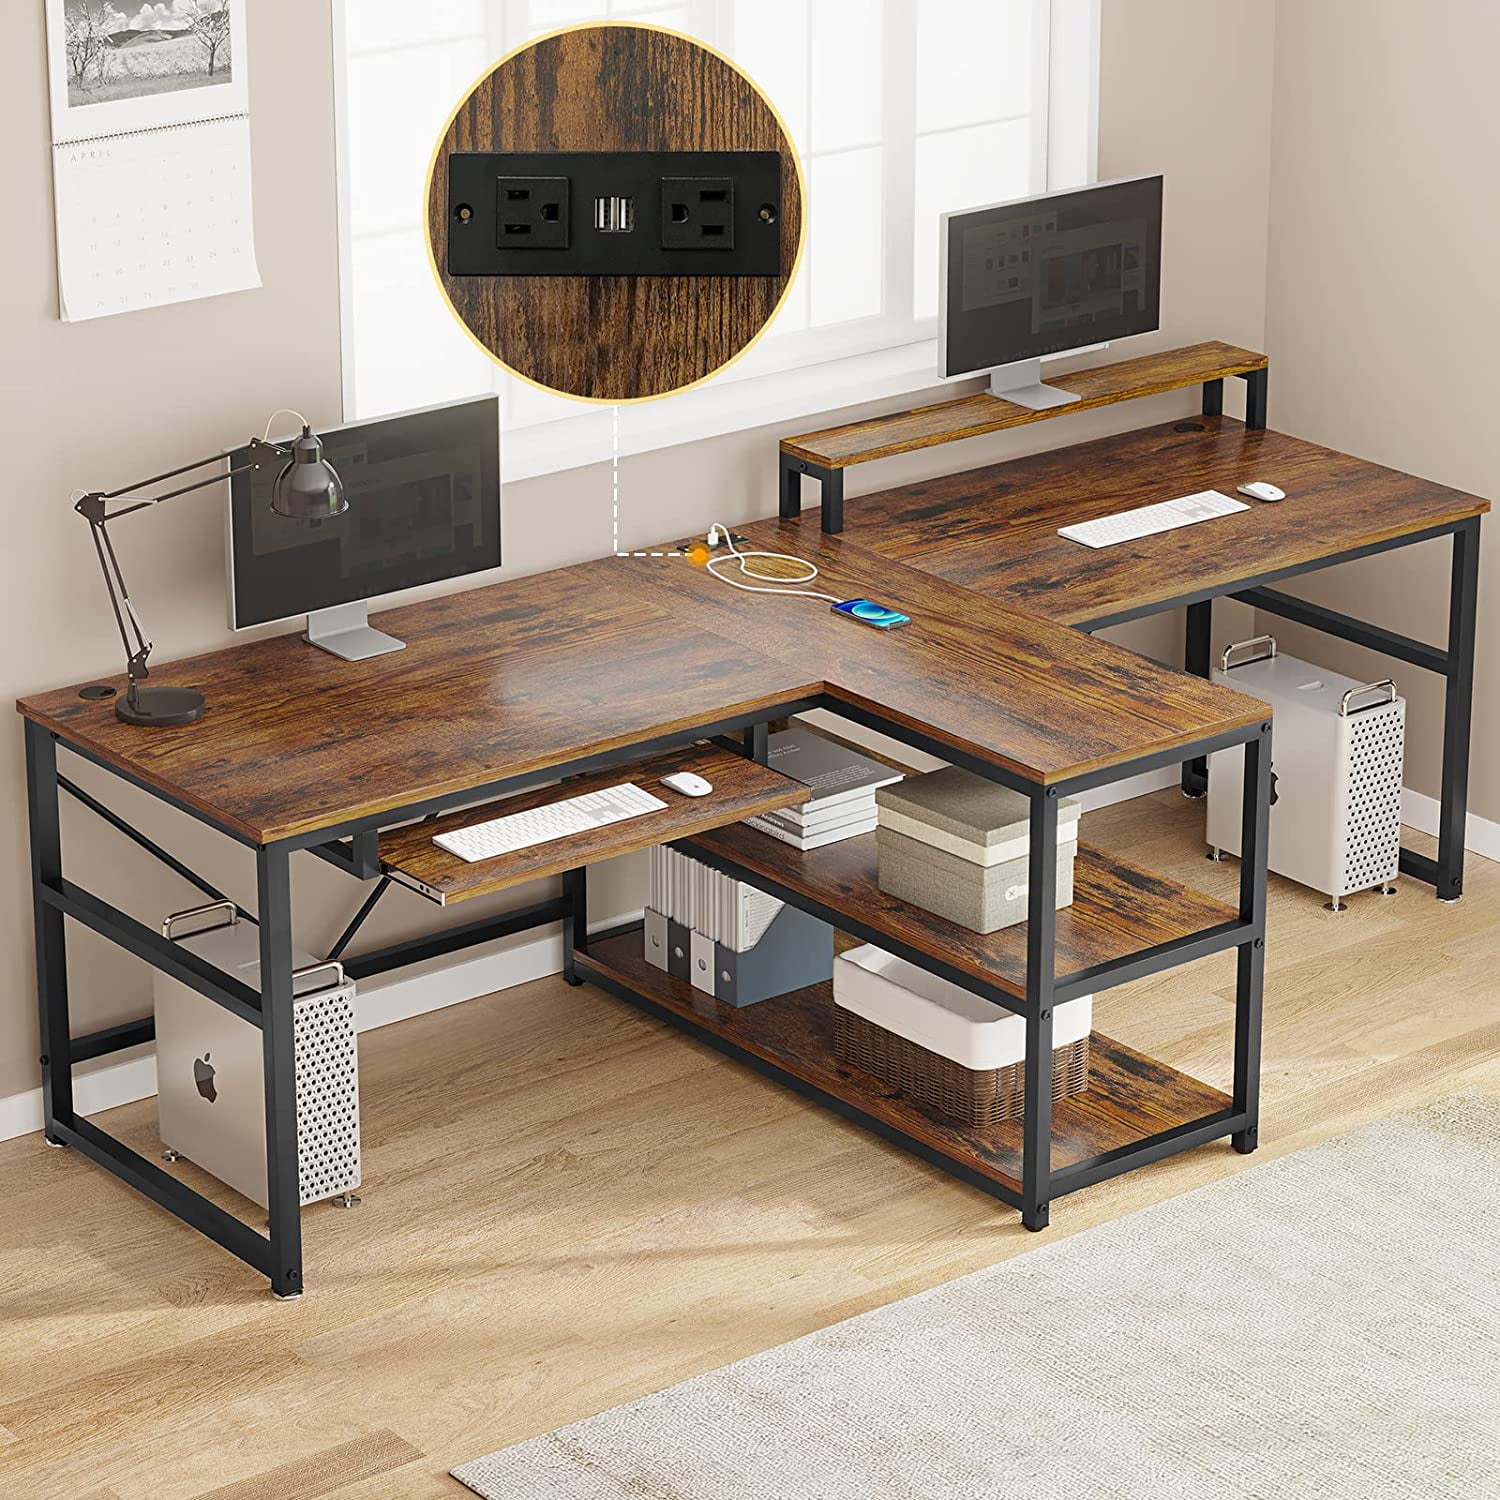 30-Inch Extra Deep Mailroom Table with 2 Lower Shelves